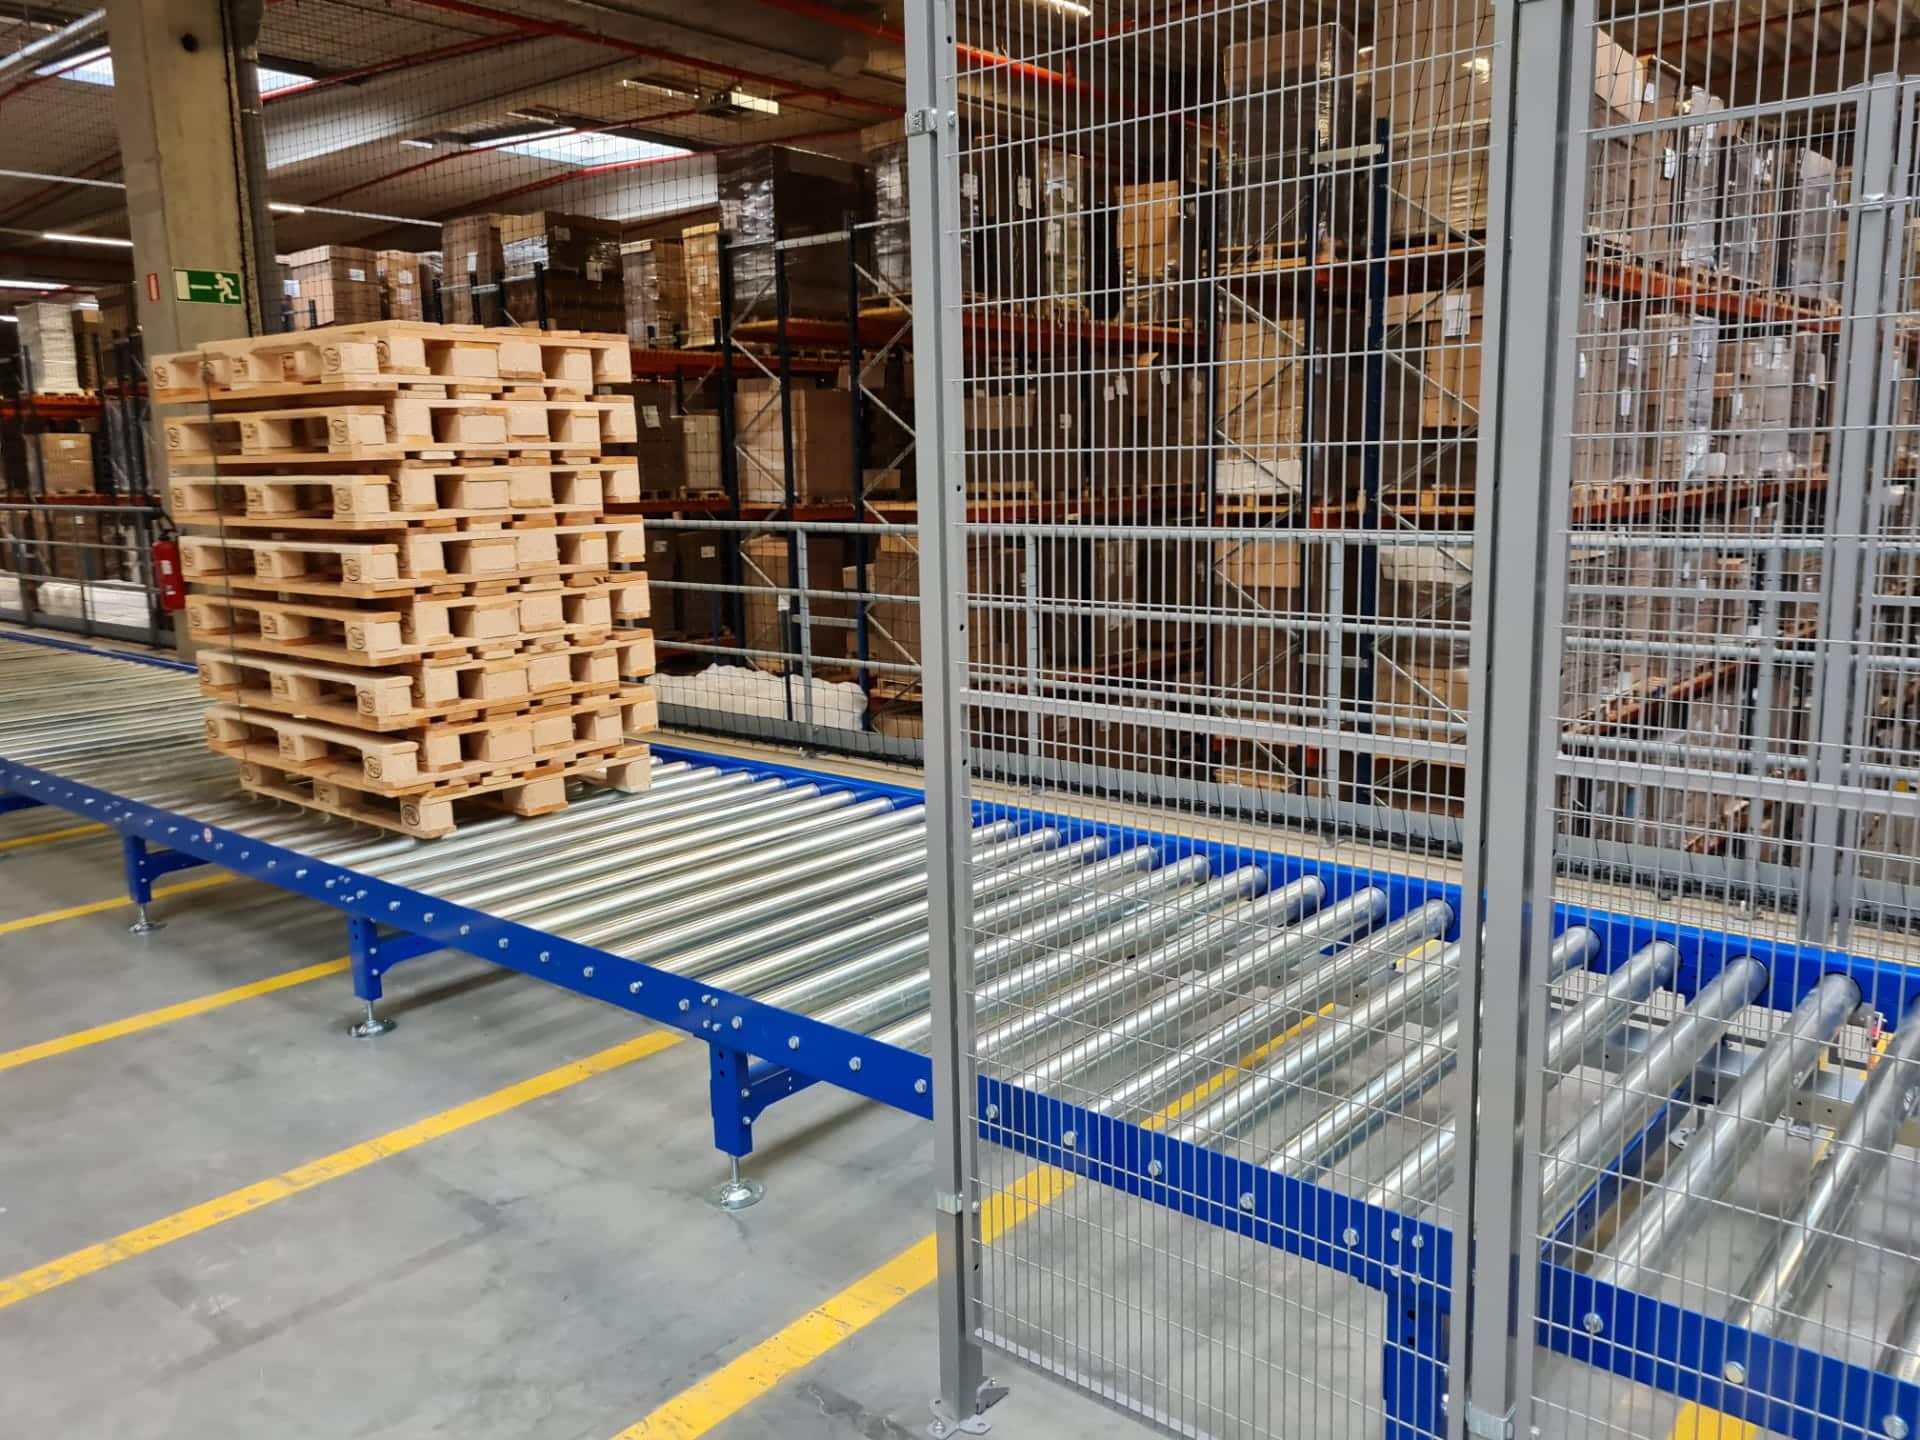 Example of one of our RCP roller conveyors, used here to transport Euro pallets.